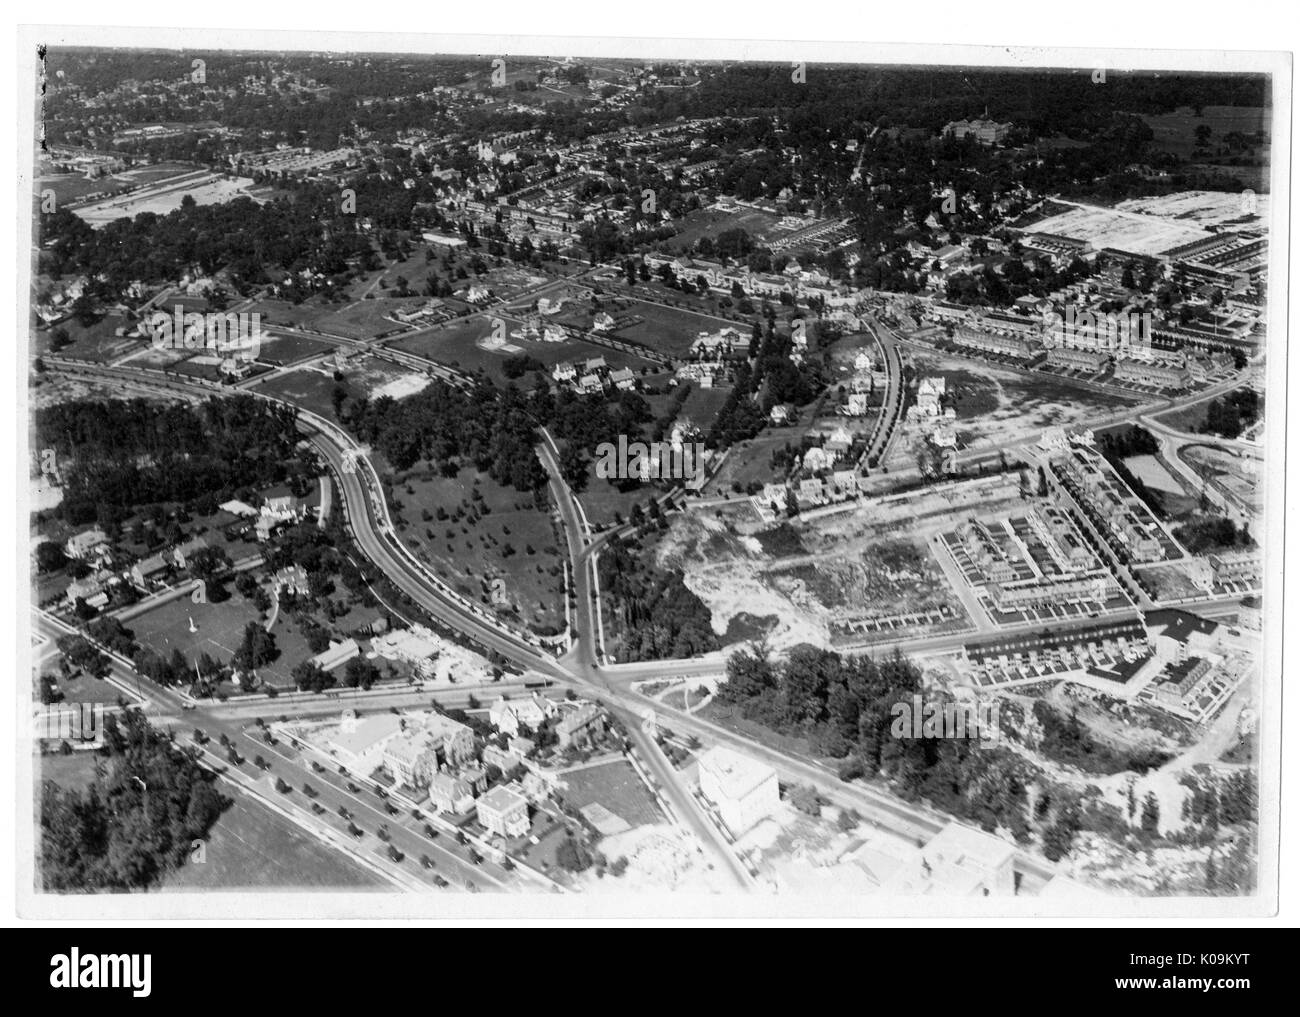 Aerial view of roads and highways intersecting, with neighborhoods to the left, and grassy areas with trees toward the back, Roland Park/Guilford, Baltimore, Maryland, 1910. This image is from a series documenting the construction and sale of homes in the Roland Park/Guilford neighborhood of Baltimore, a streetcar suburb and one of the first planned communities in the United States. The neighborhood was segregated, and is considered an early example of the enforcement of racial segregation through the use of restricted covenants. Stock Photo